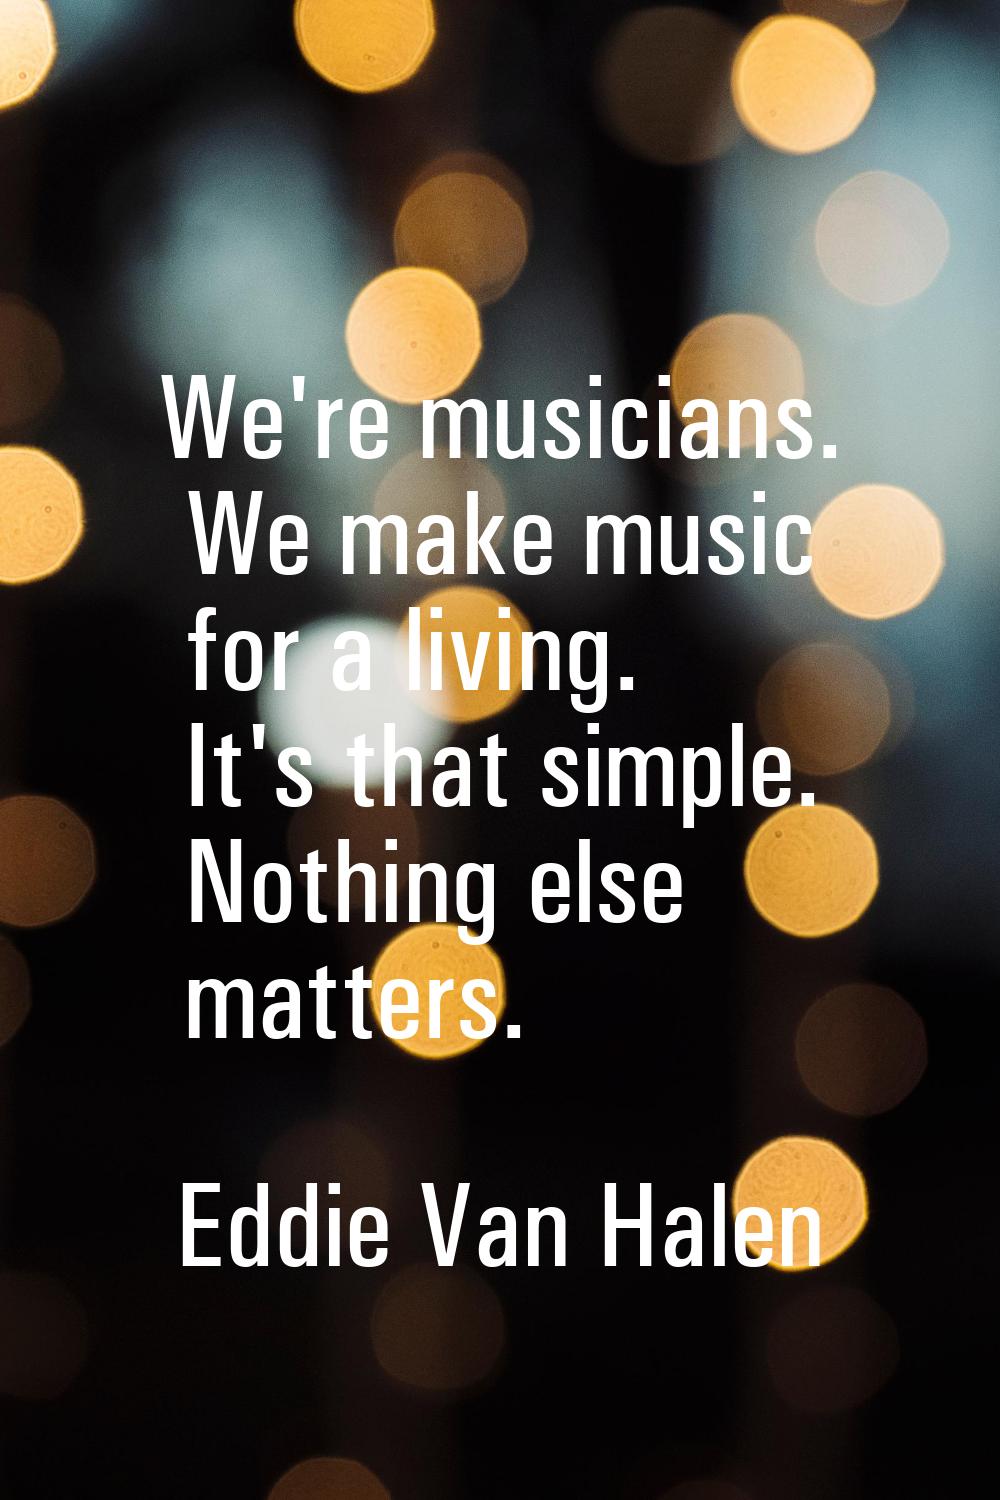 We're musicians. We make music for a living. It's that simple. Nothing else matters.